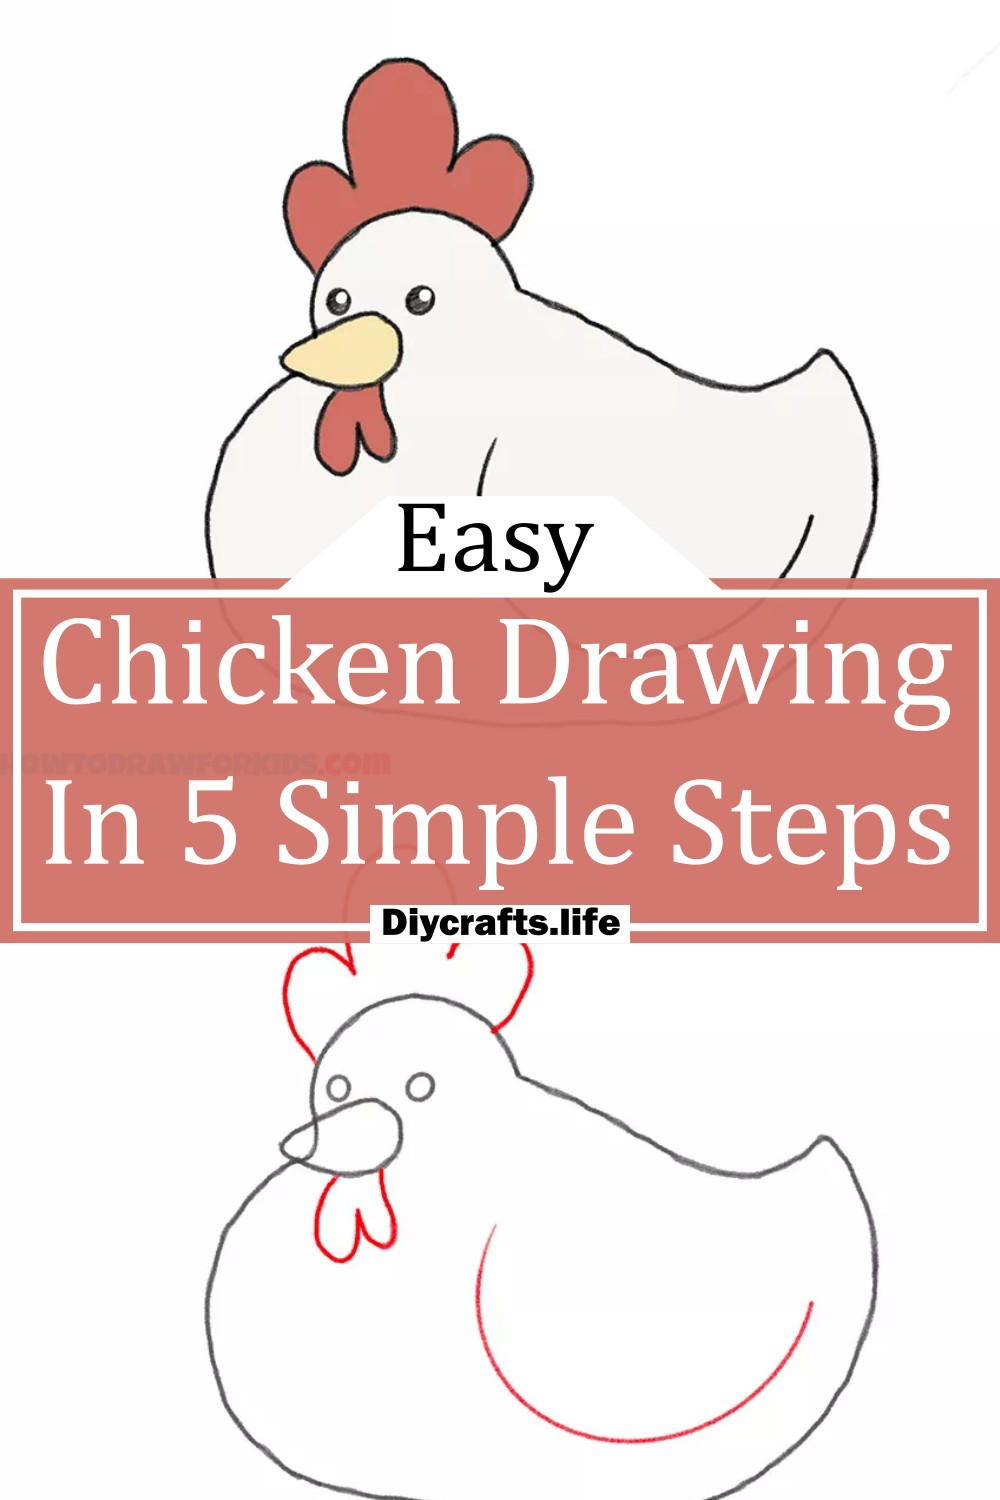 Chicken Drawing In 5 Simple Steps